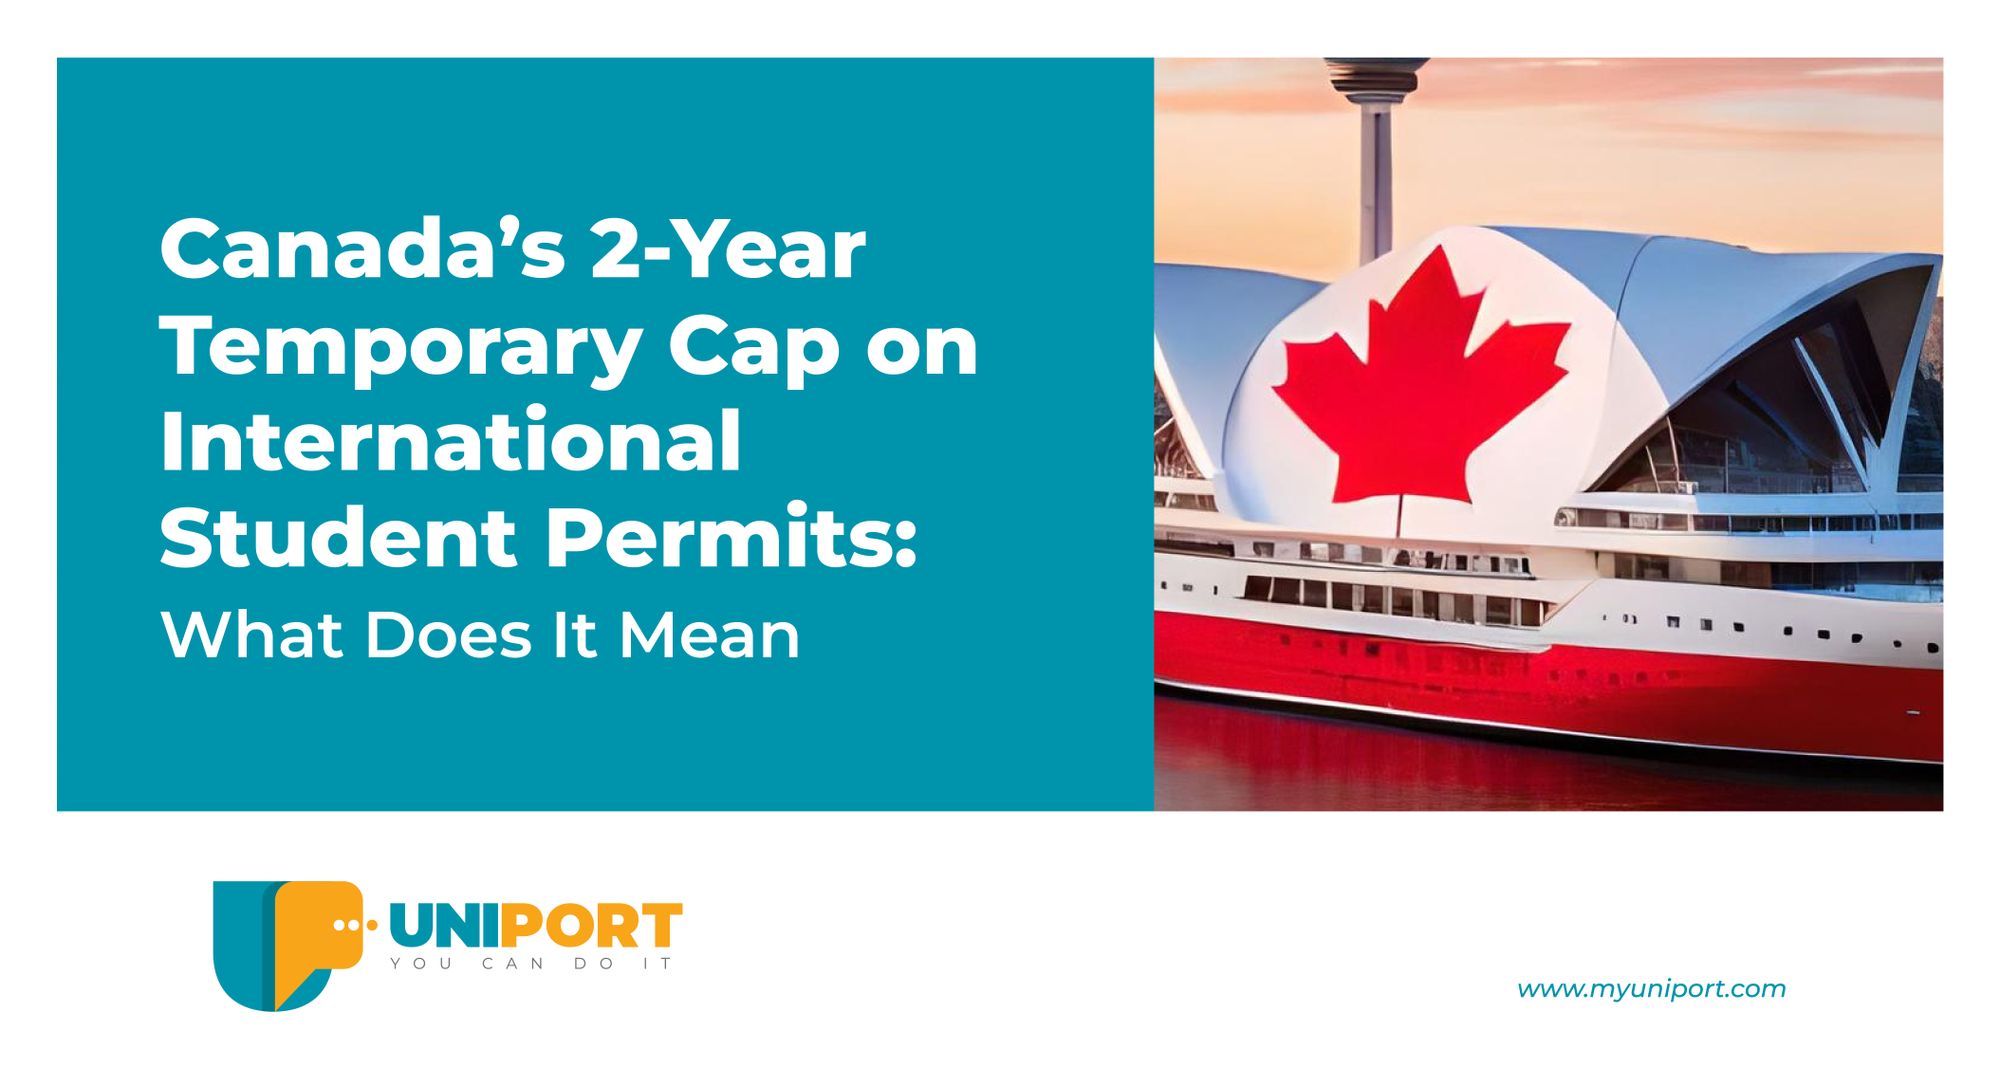 Canada’s 2-Year Temporary Cap on International Student Permits: What Does It Mean?